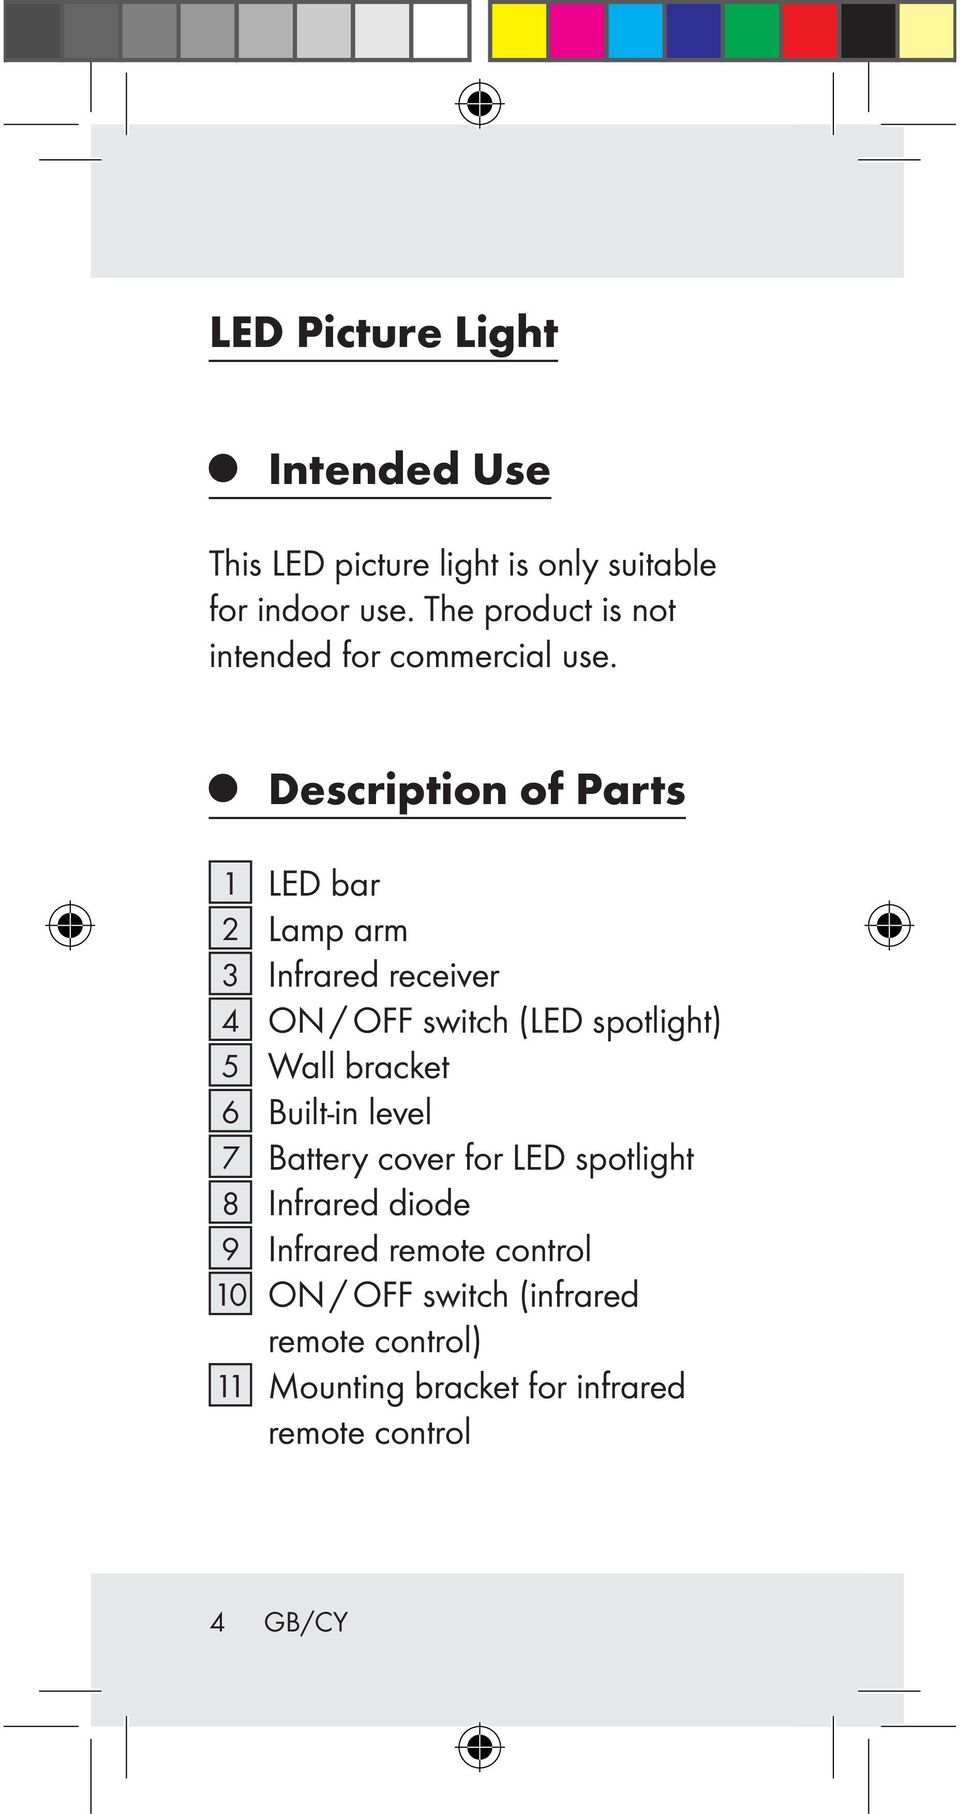 Description of Parts 1 LED bar 2 Lamp arm 3 Infrared receiver 4 ON / OFF switch (LED spotlight) 5 Wall